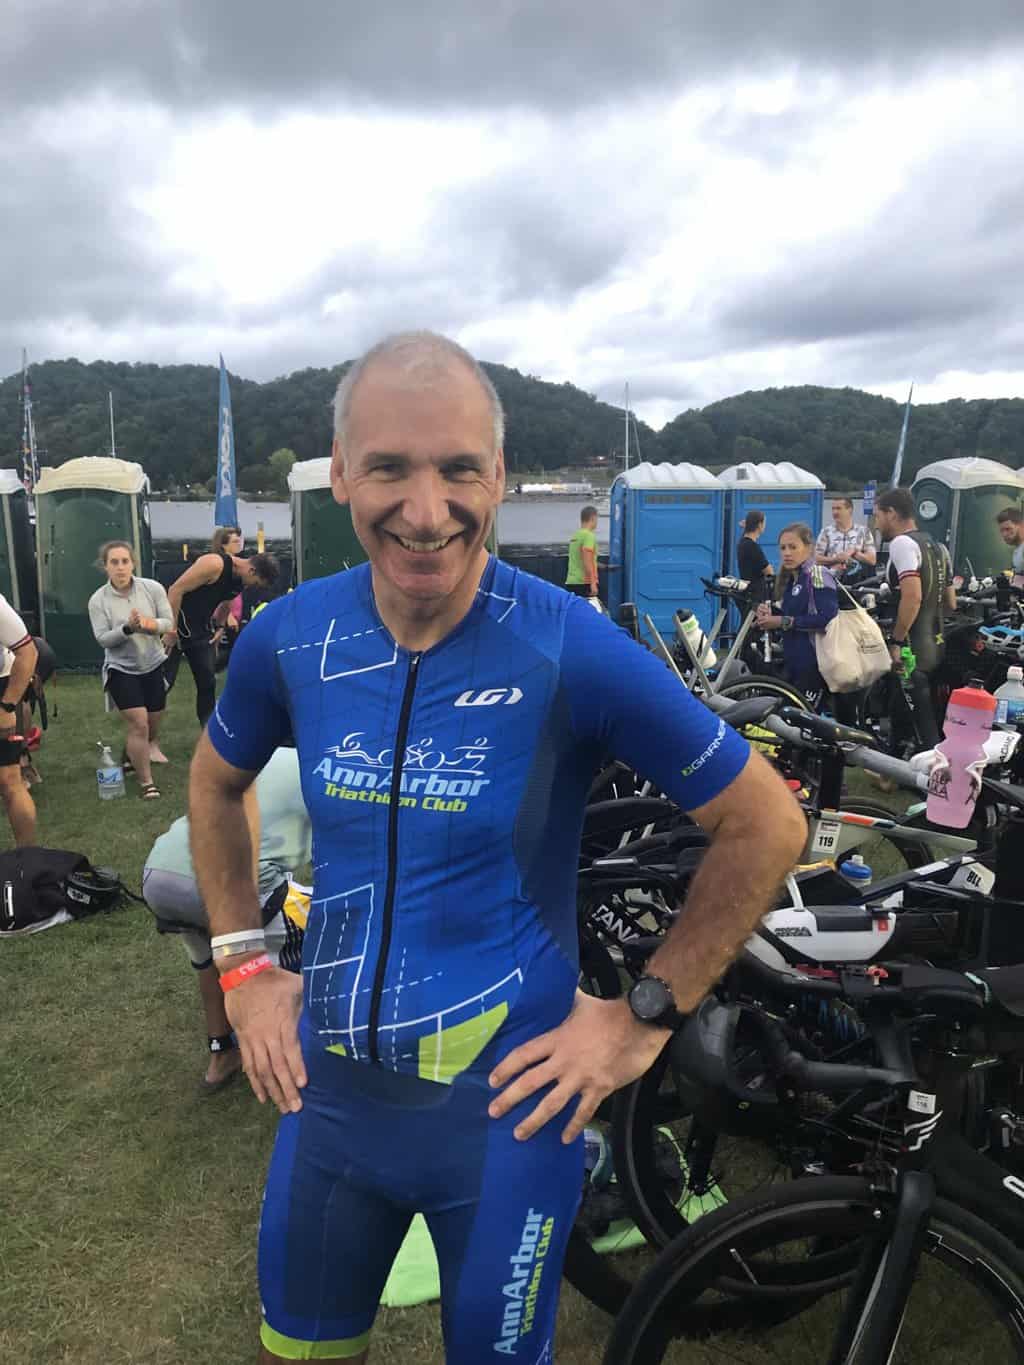 A white man in a blue triathlon kit standing in front of his triathlon bike at a race.